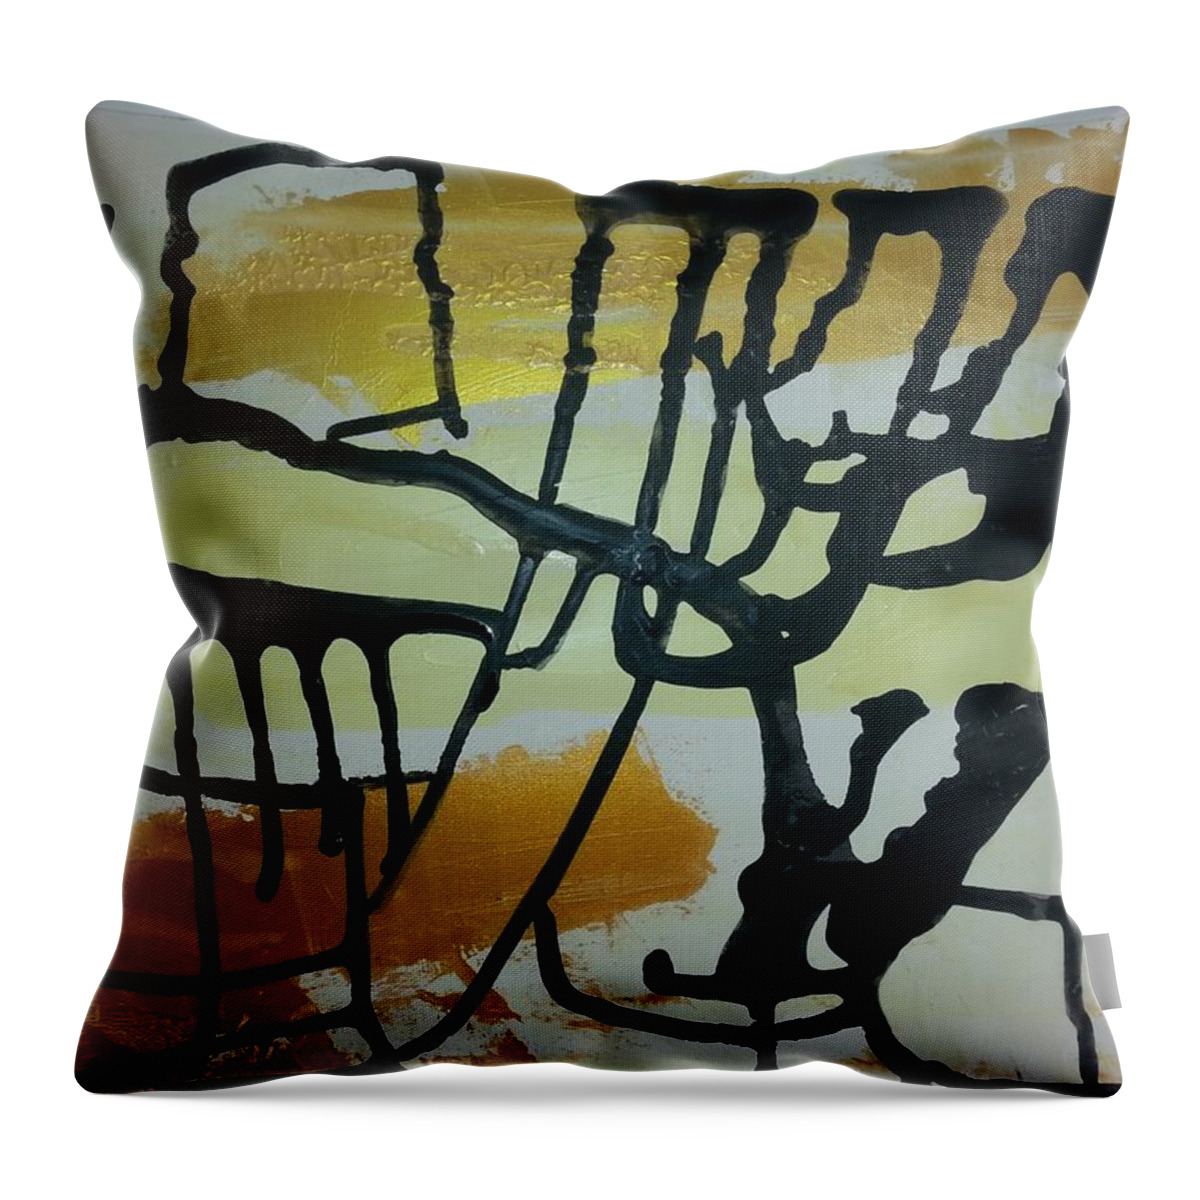  Throw Pillow featuring the painting Caos 31 by Giuseppe Monti